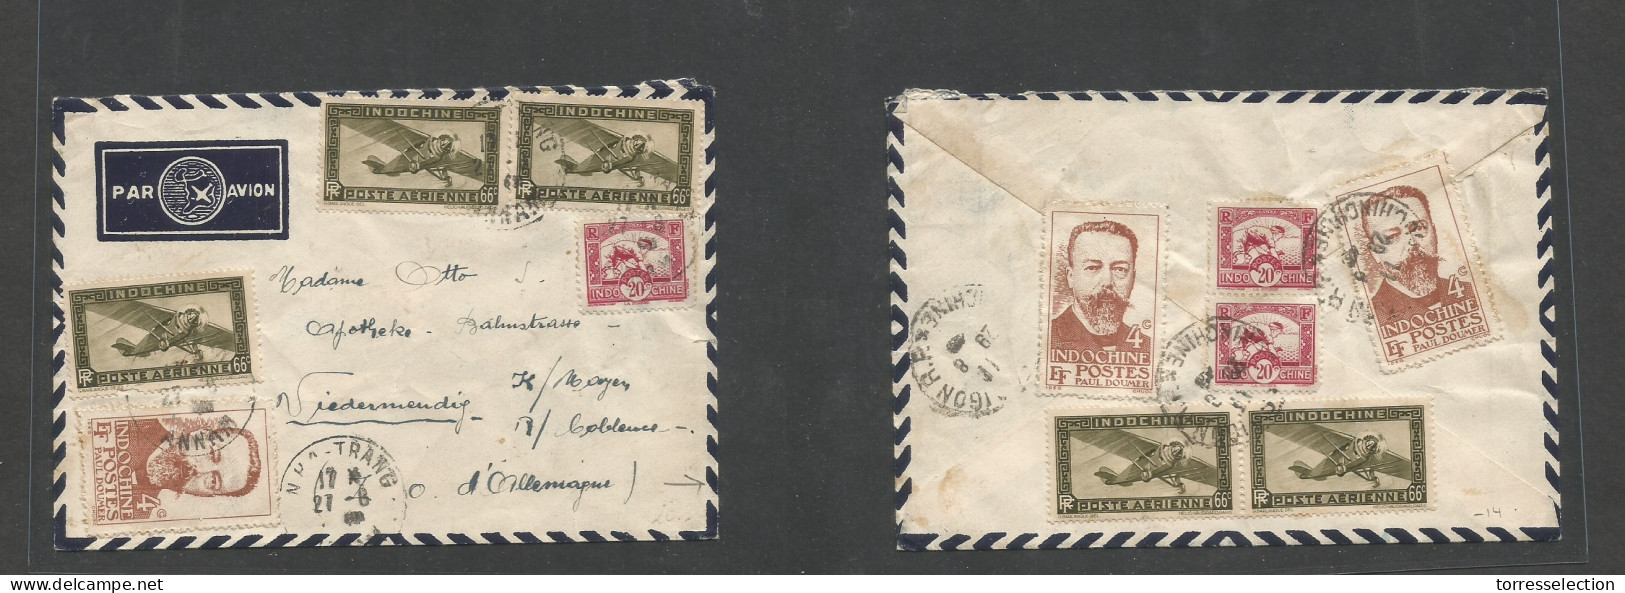 INDOCHINA. C. 1932. Nha Trang - Germany, Viedermendig. Air Multifkd Front And Reverse. Fine Used. SALE. - Sonstige - Asien